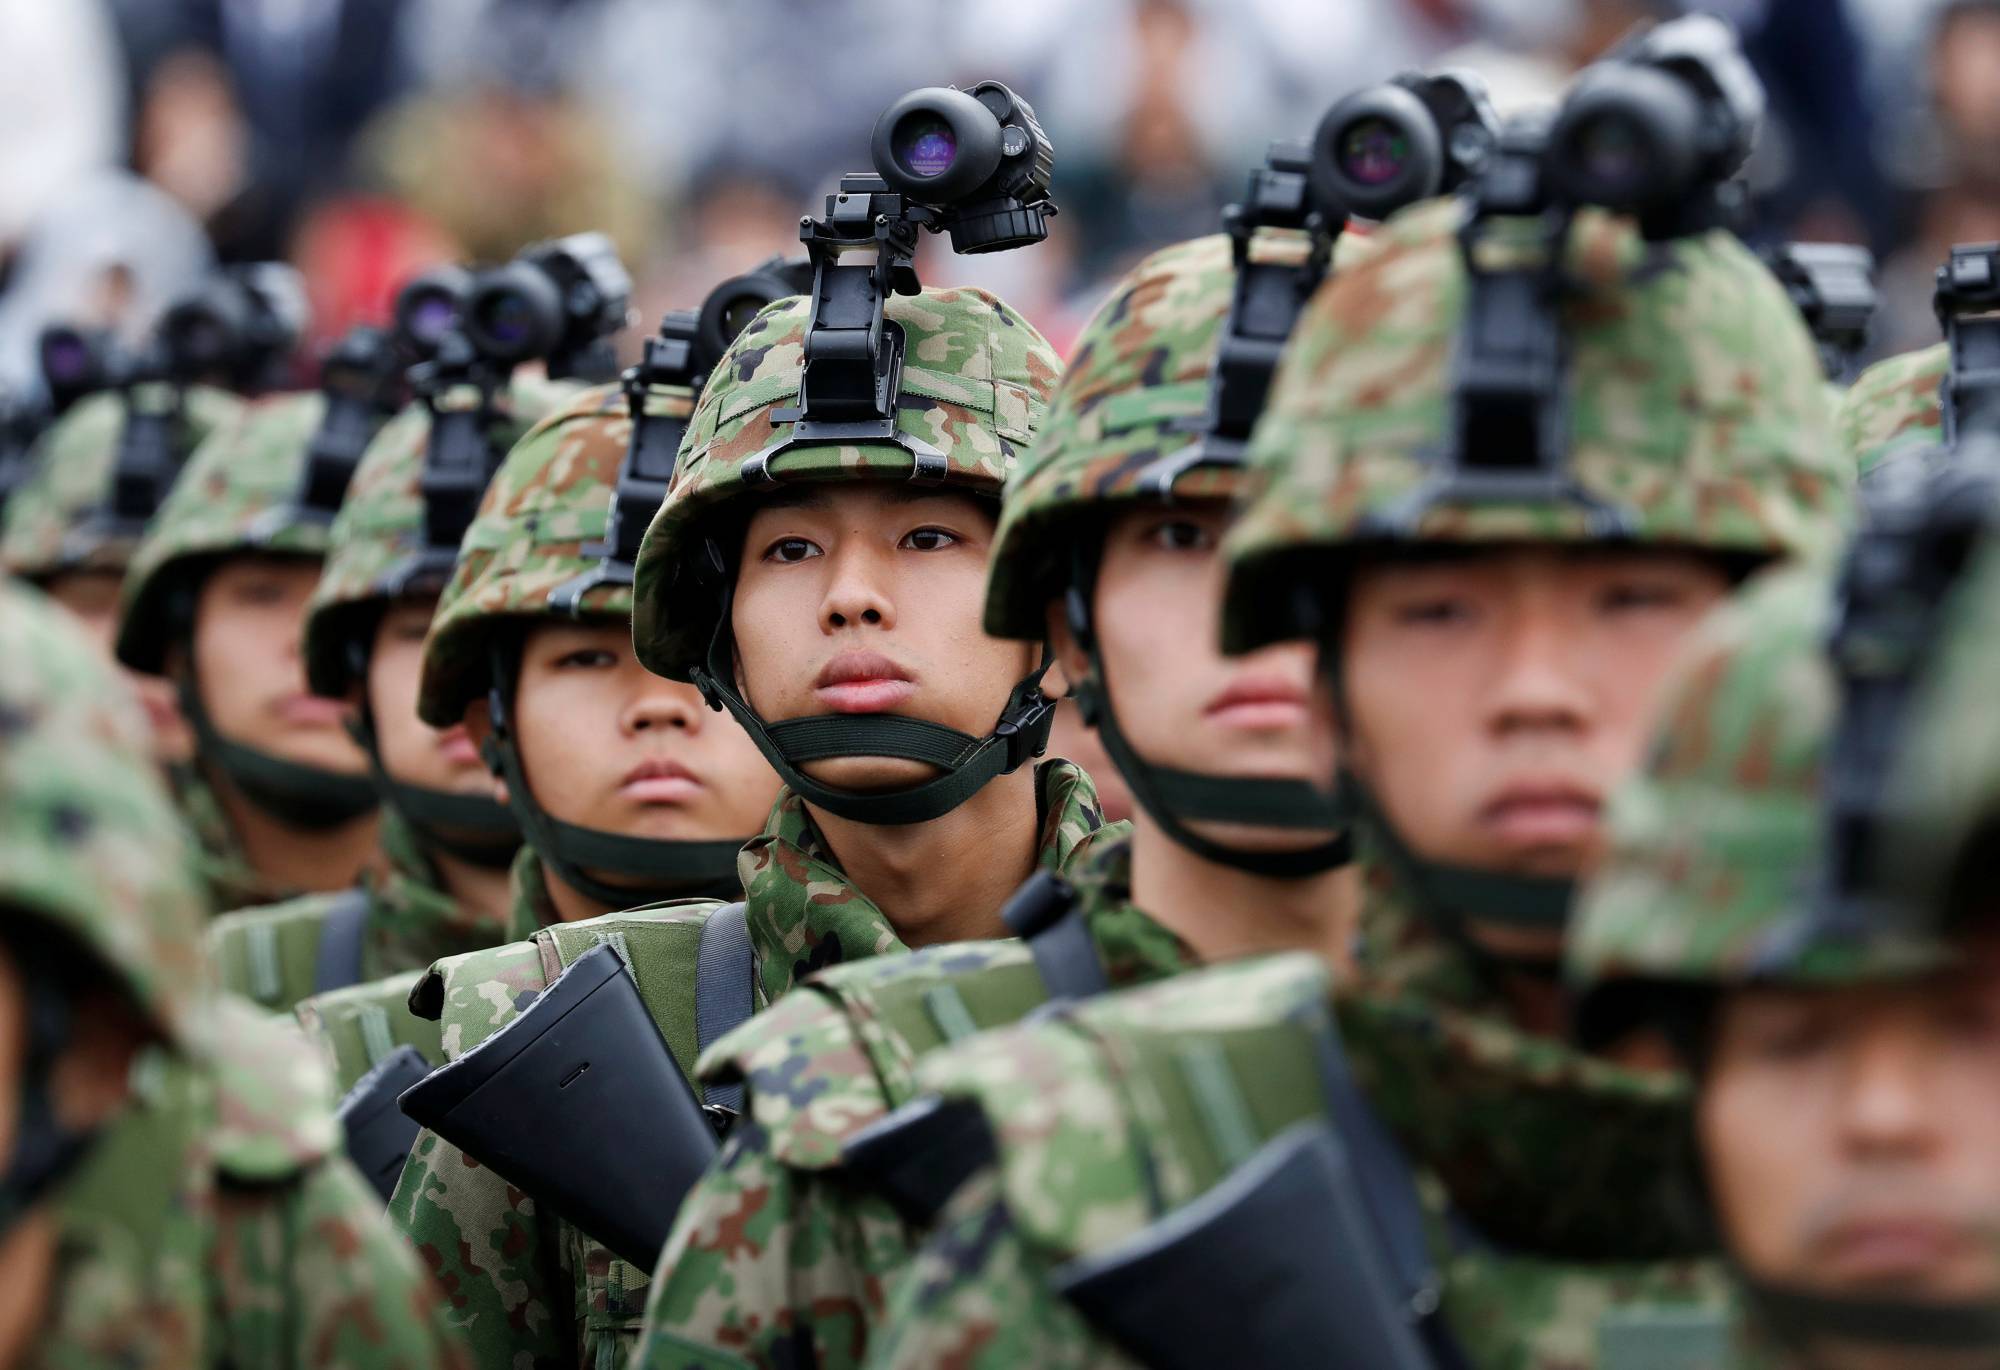 Japan's military will allow long hair and tattoos: what's happening